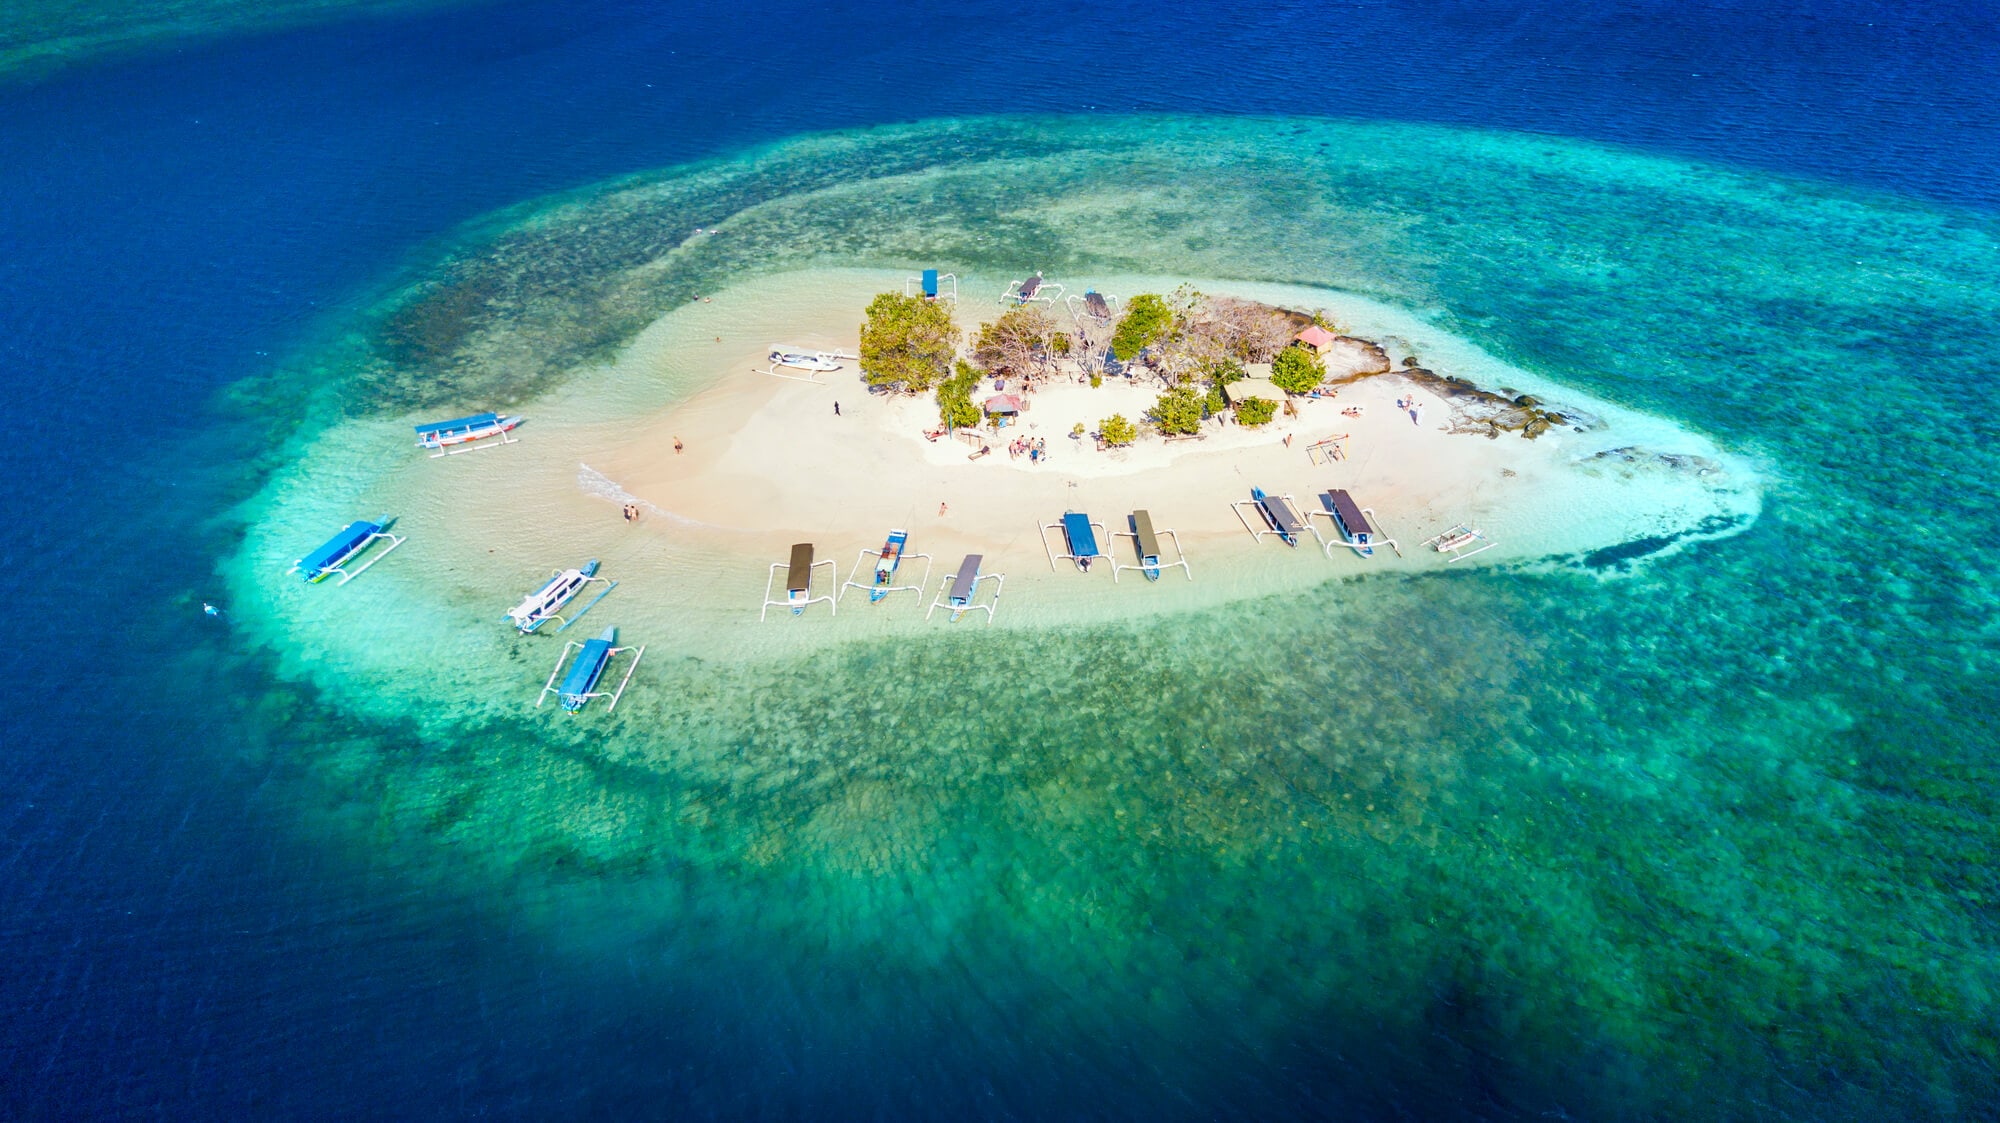 A sandbar surrounded by coral reef and dark blue water with a few traditional Indonesian boats and trees, seen from above.